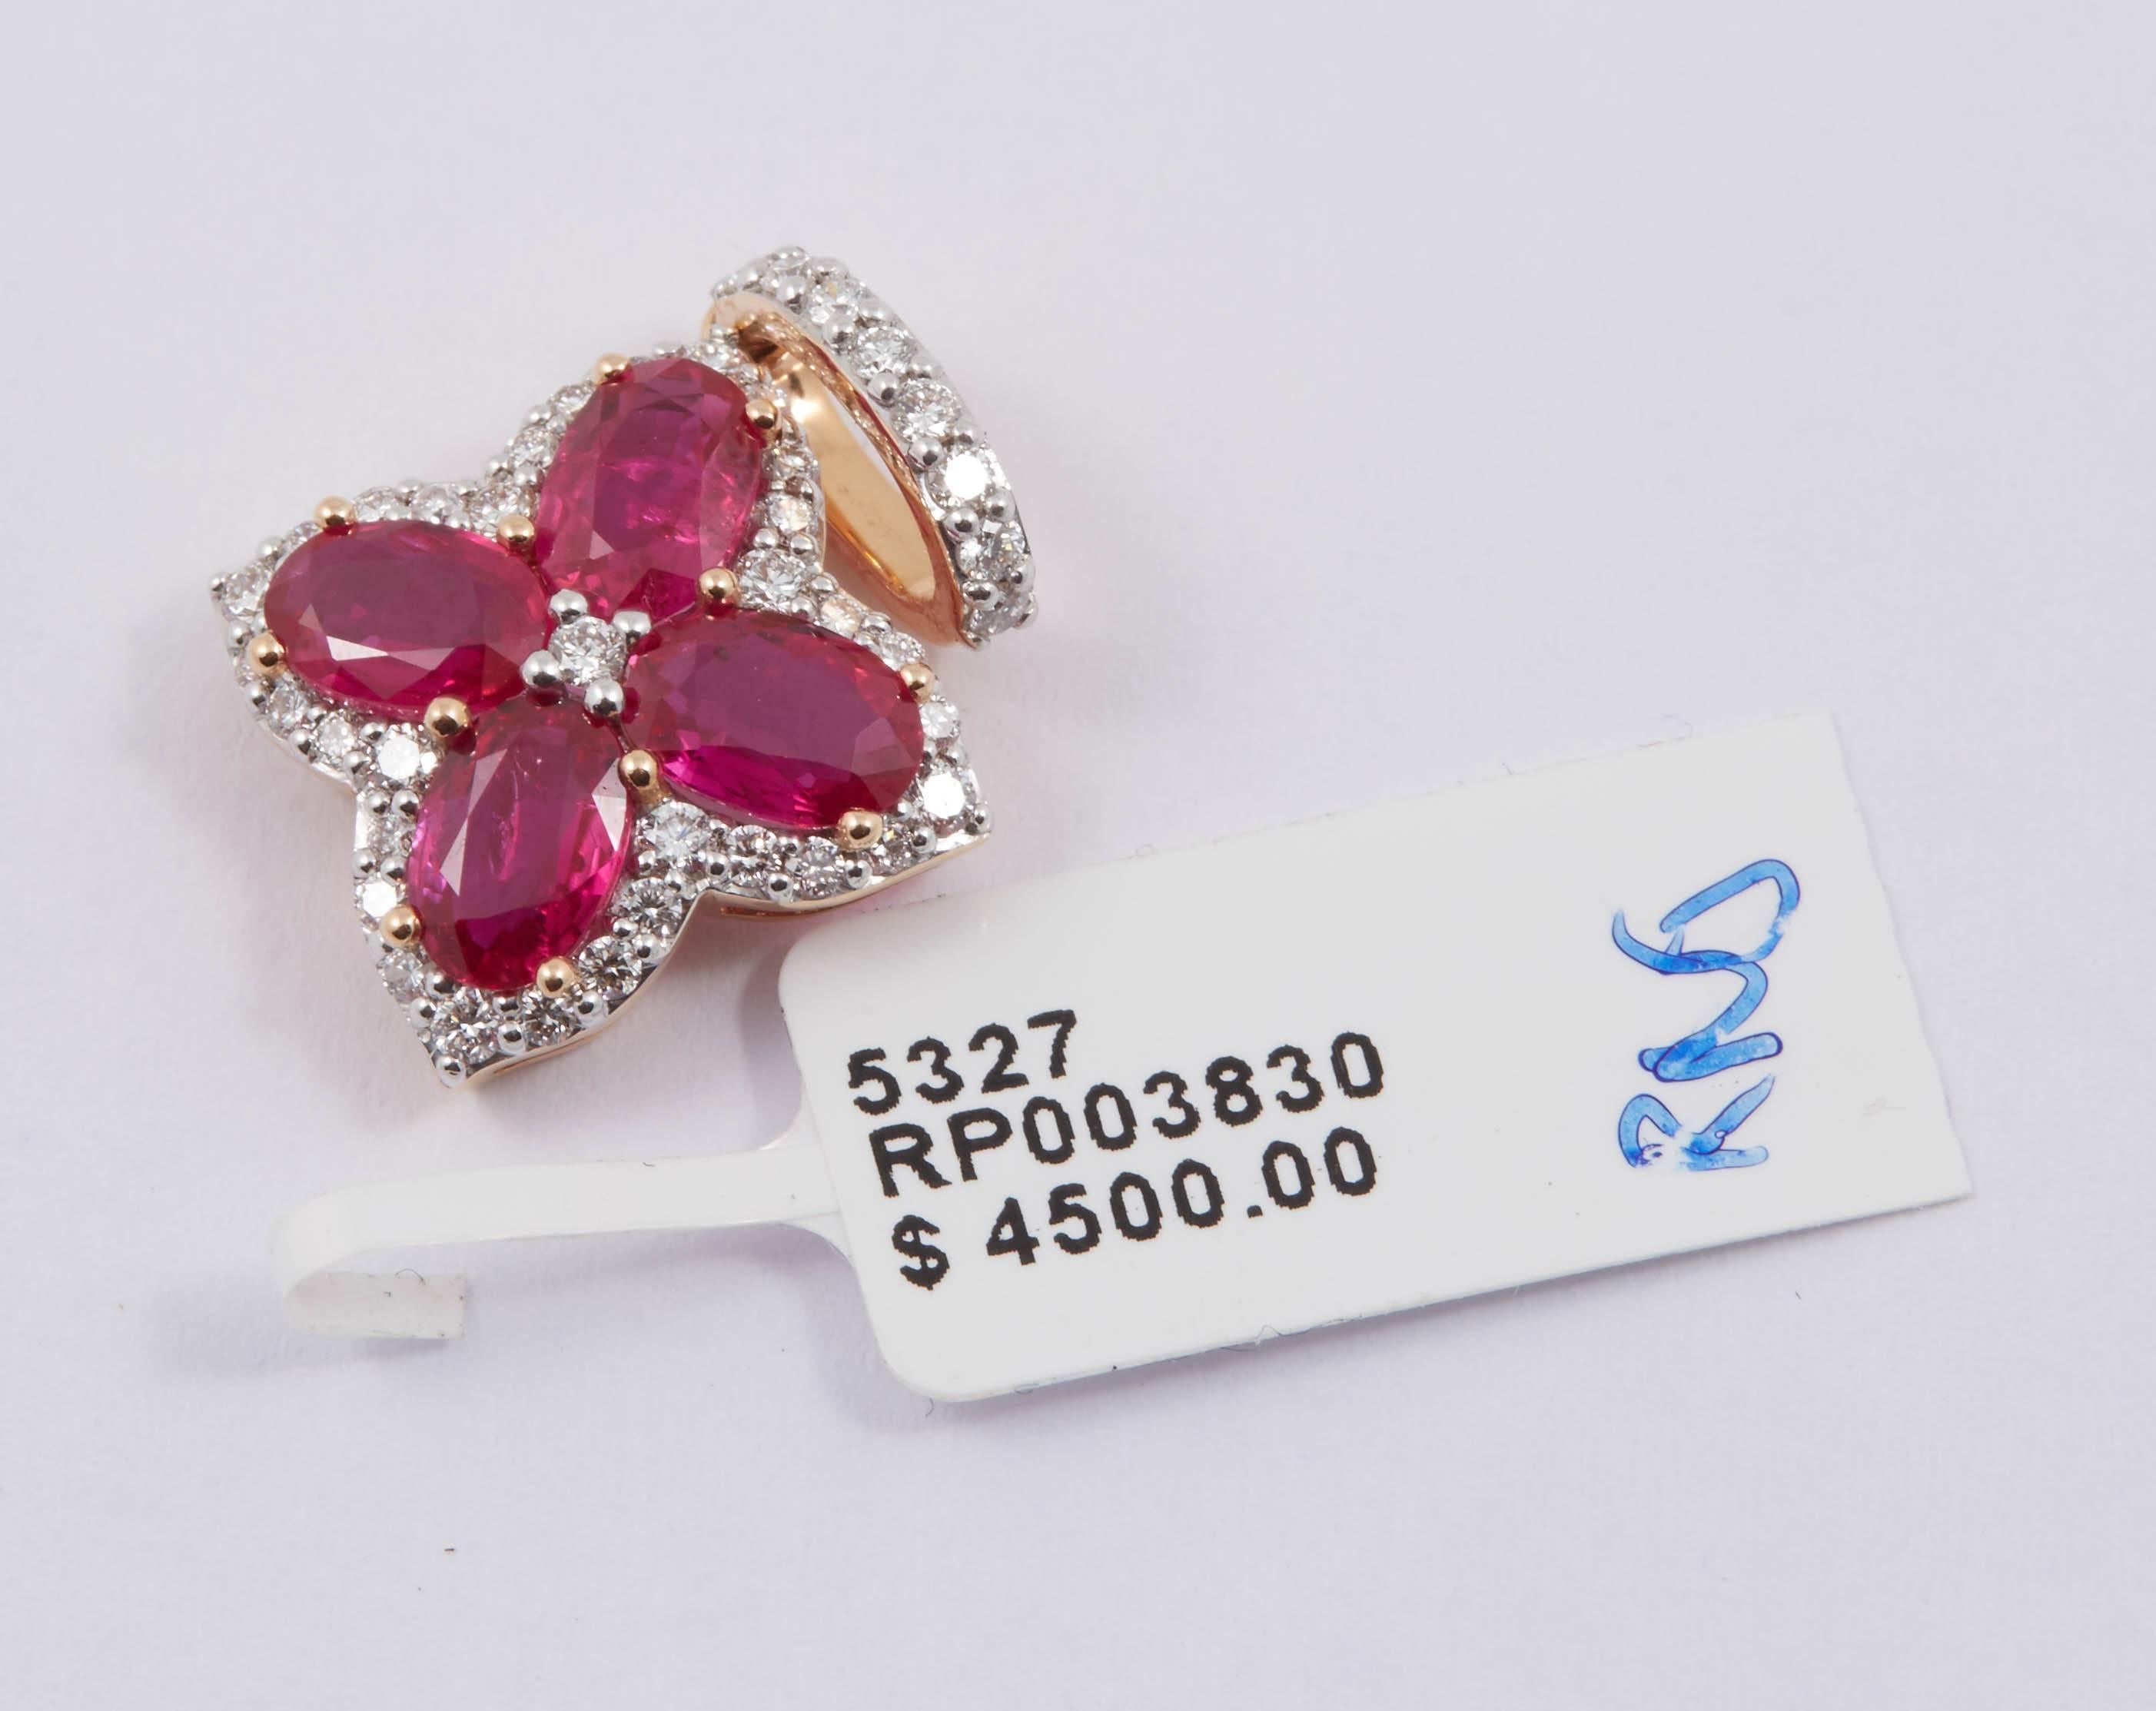 18K Rose Gold
2.1 g.
4 Ruby: 2.25 Cts
41 Round Diamonds : 0.43 Cts.
1.25" long